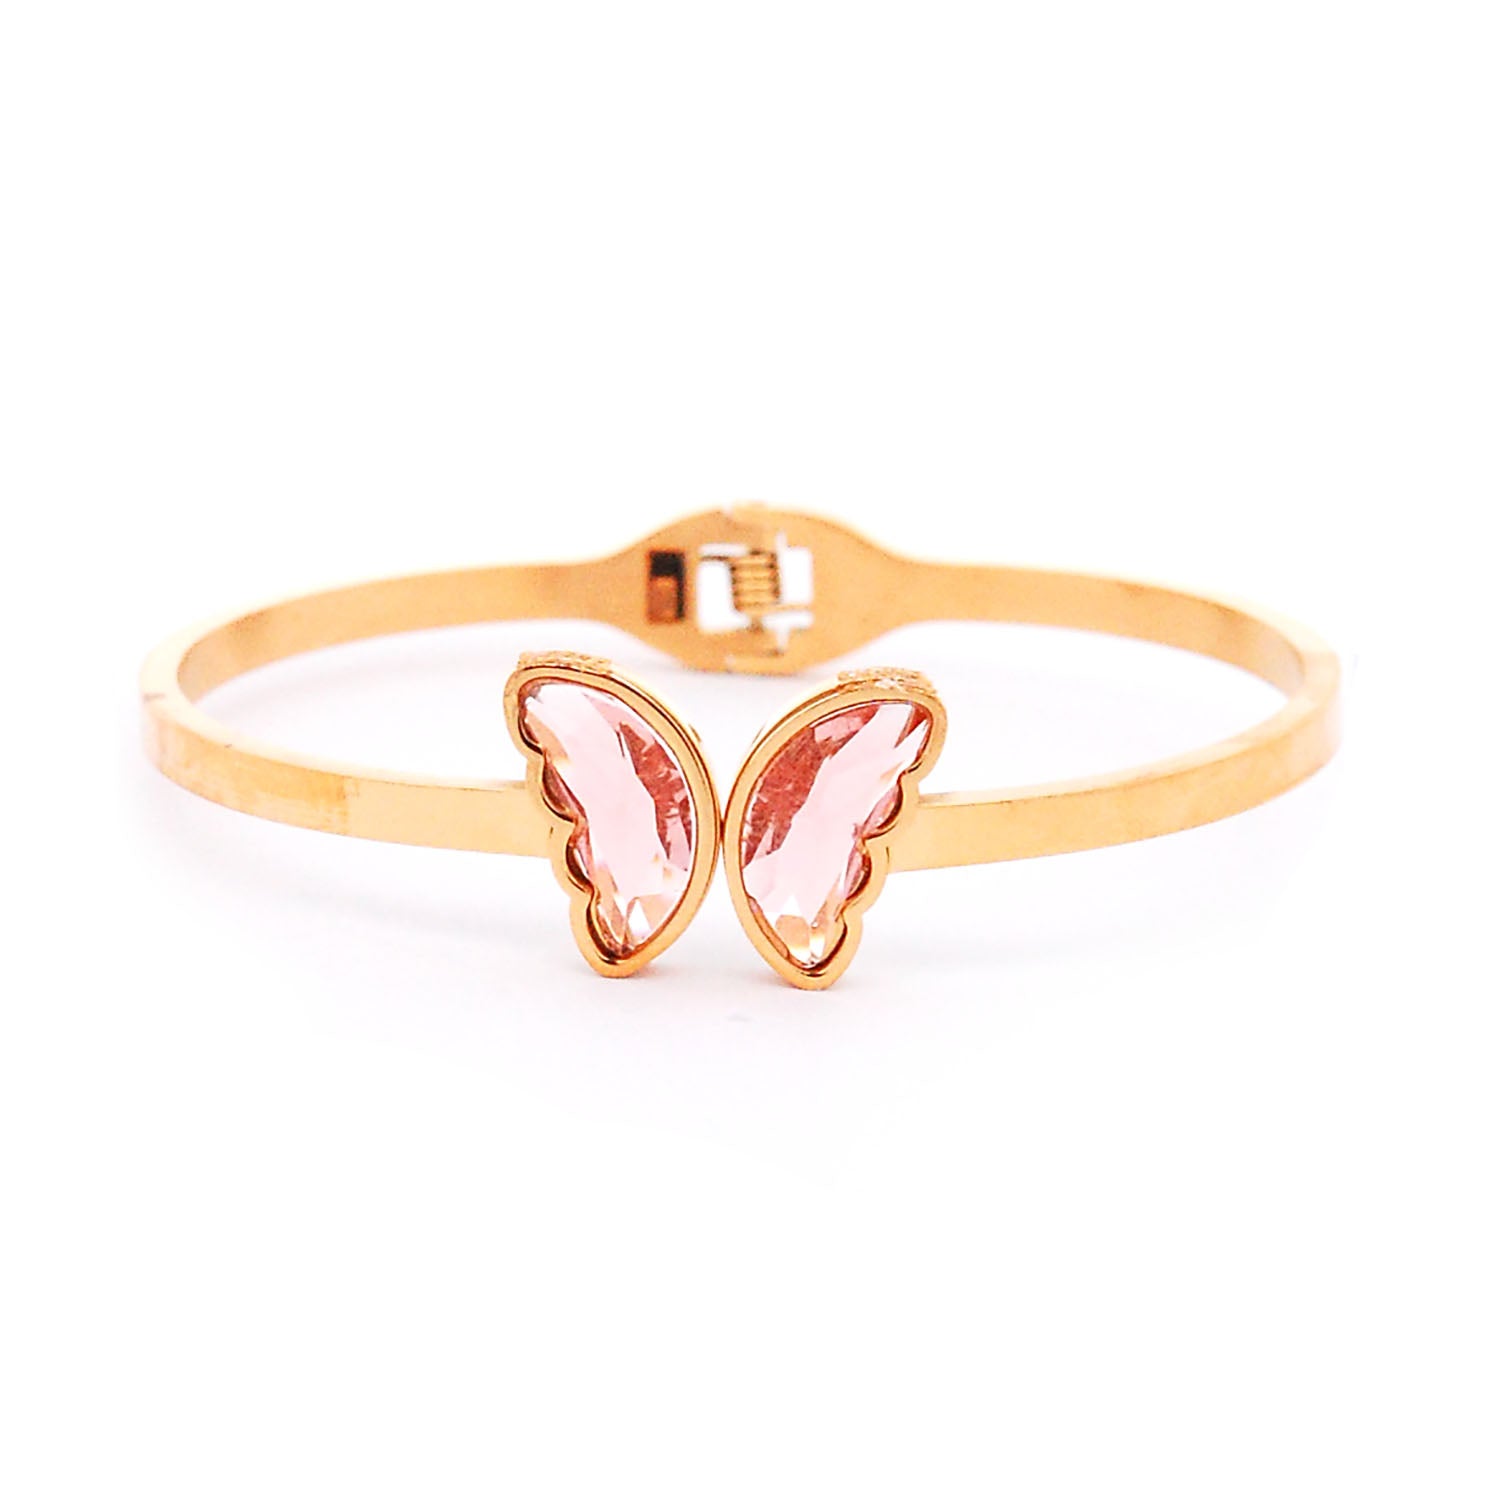 ESBG 7629: Gold-Plated Pink Crystal Butterfly Bangle